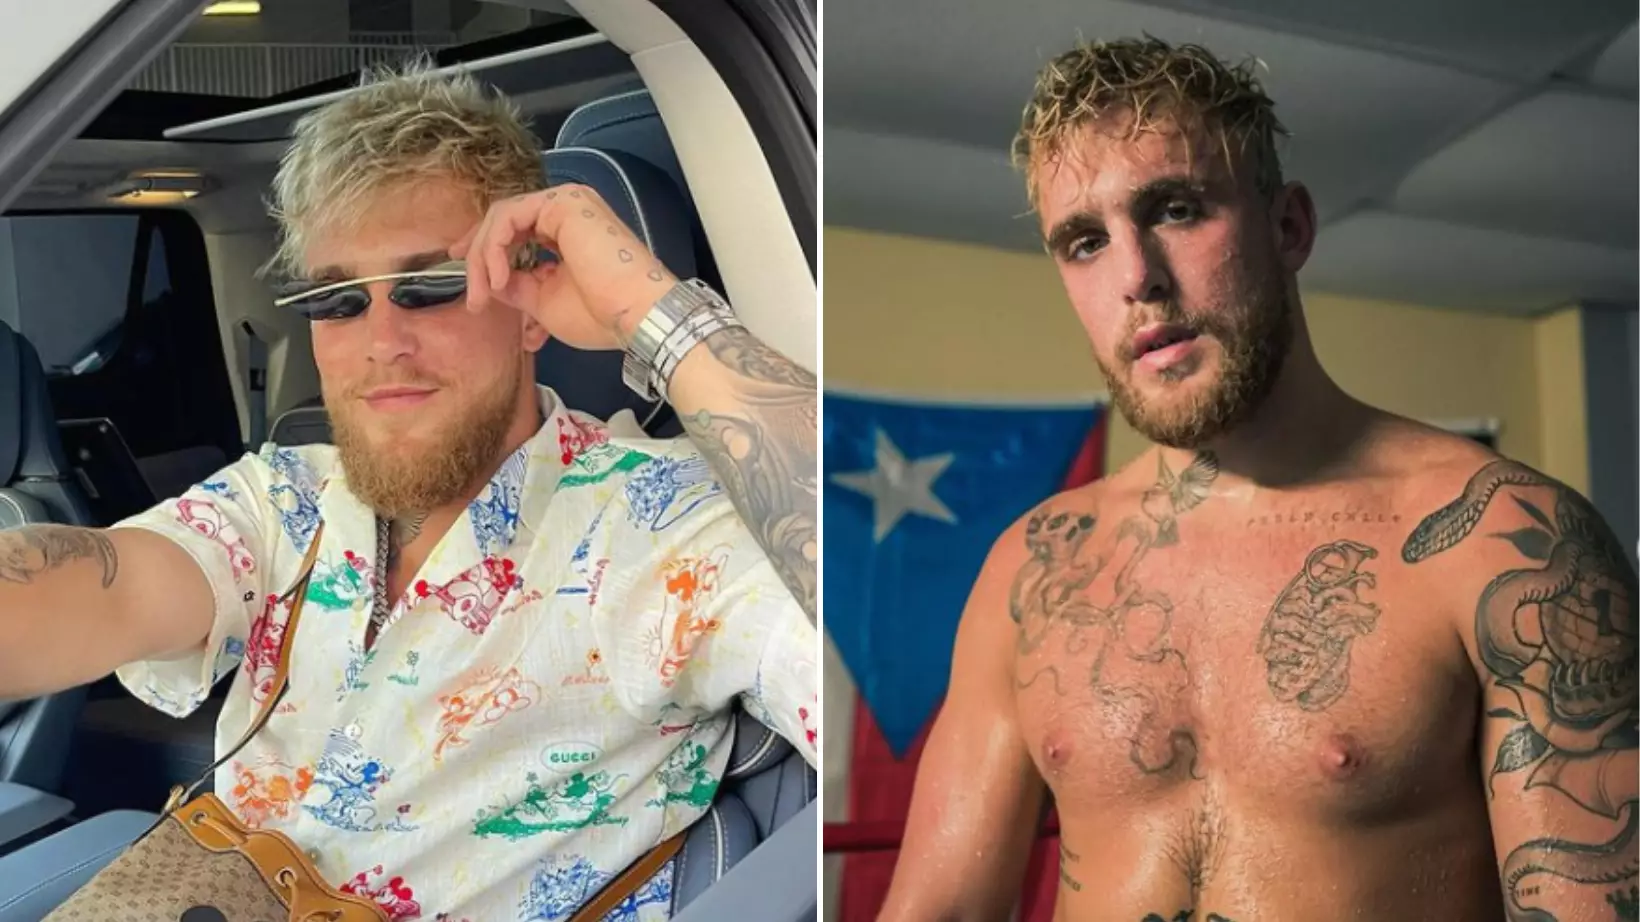 Jake Paul Sensationally Accused Of Using Steroids: 'I Definitely Think He's Going To Be On PEDs'